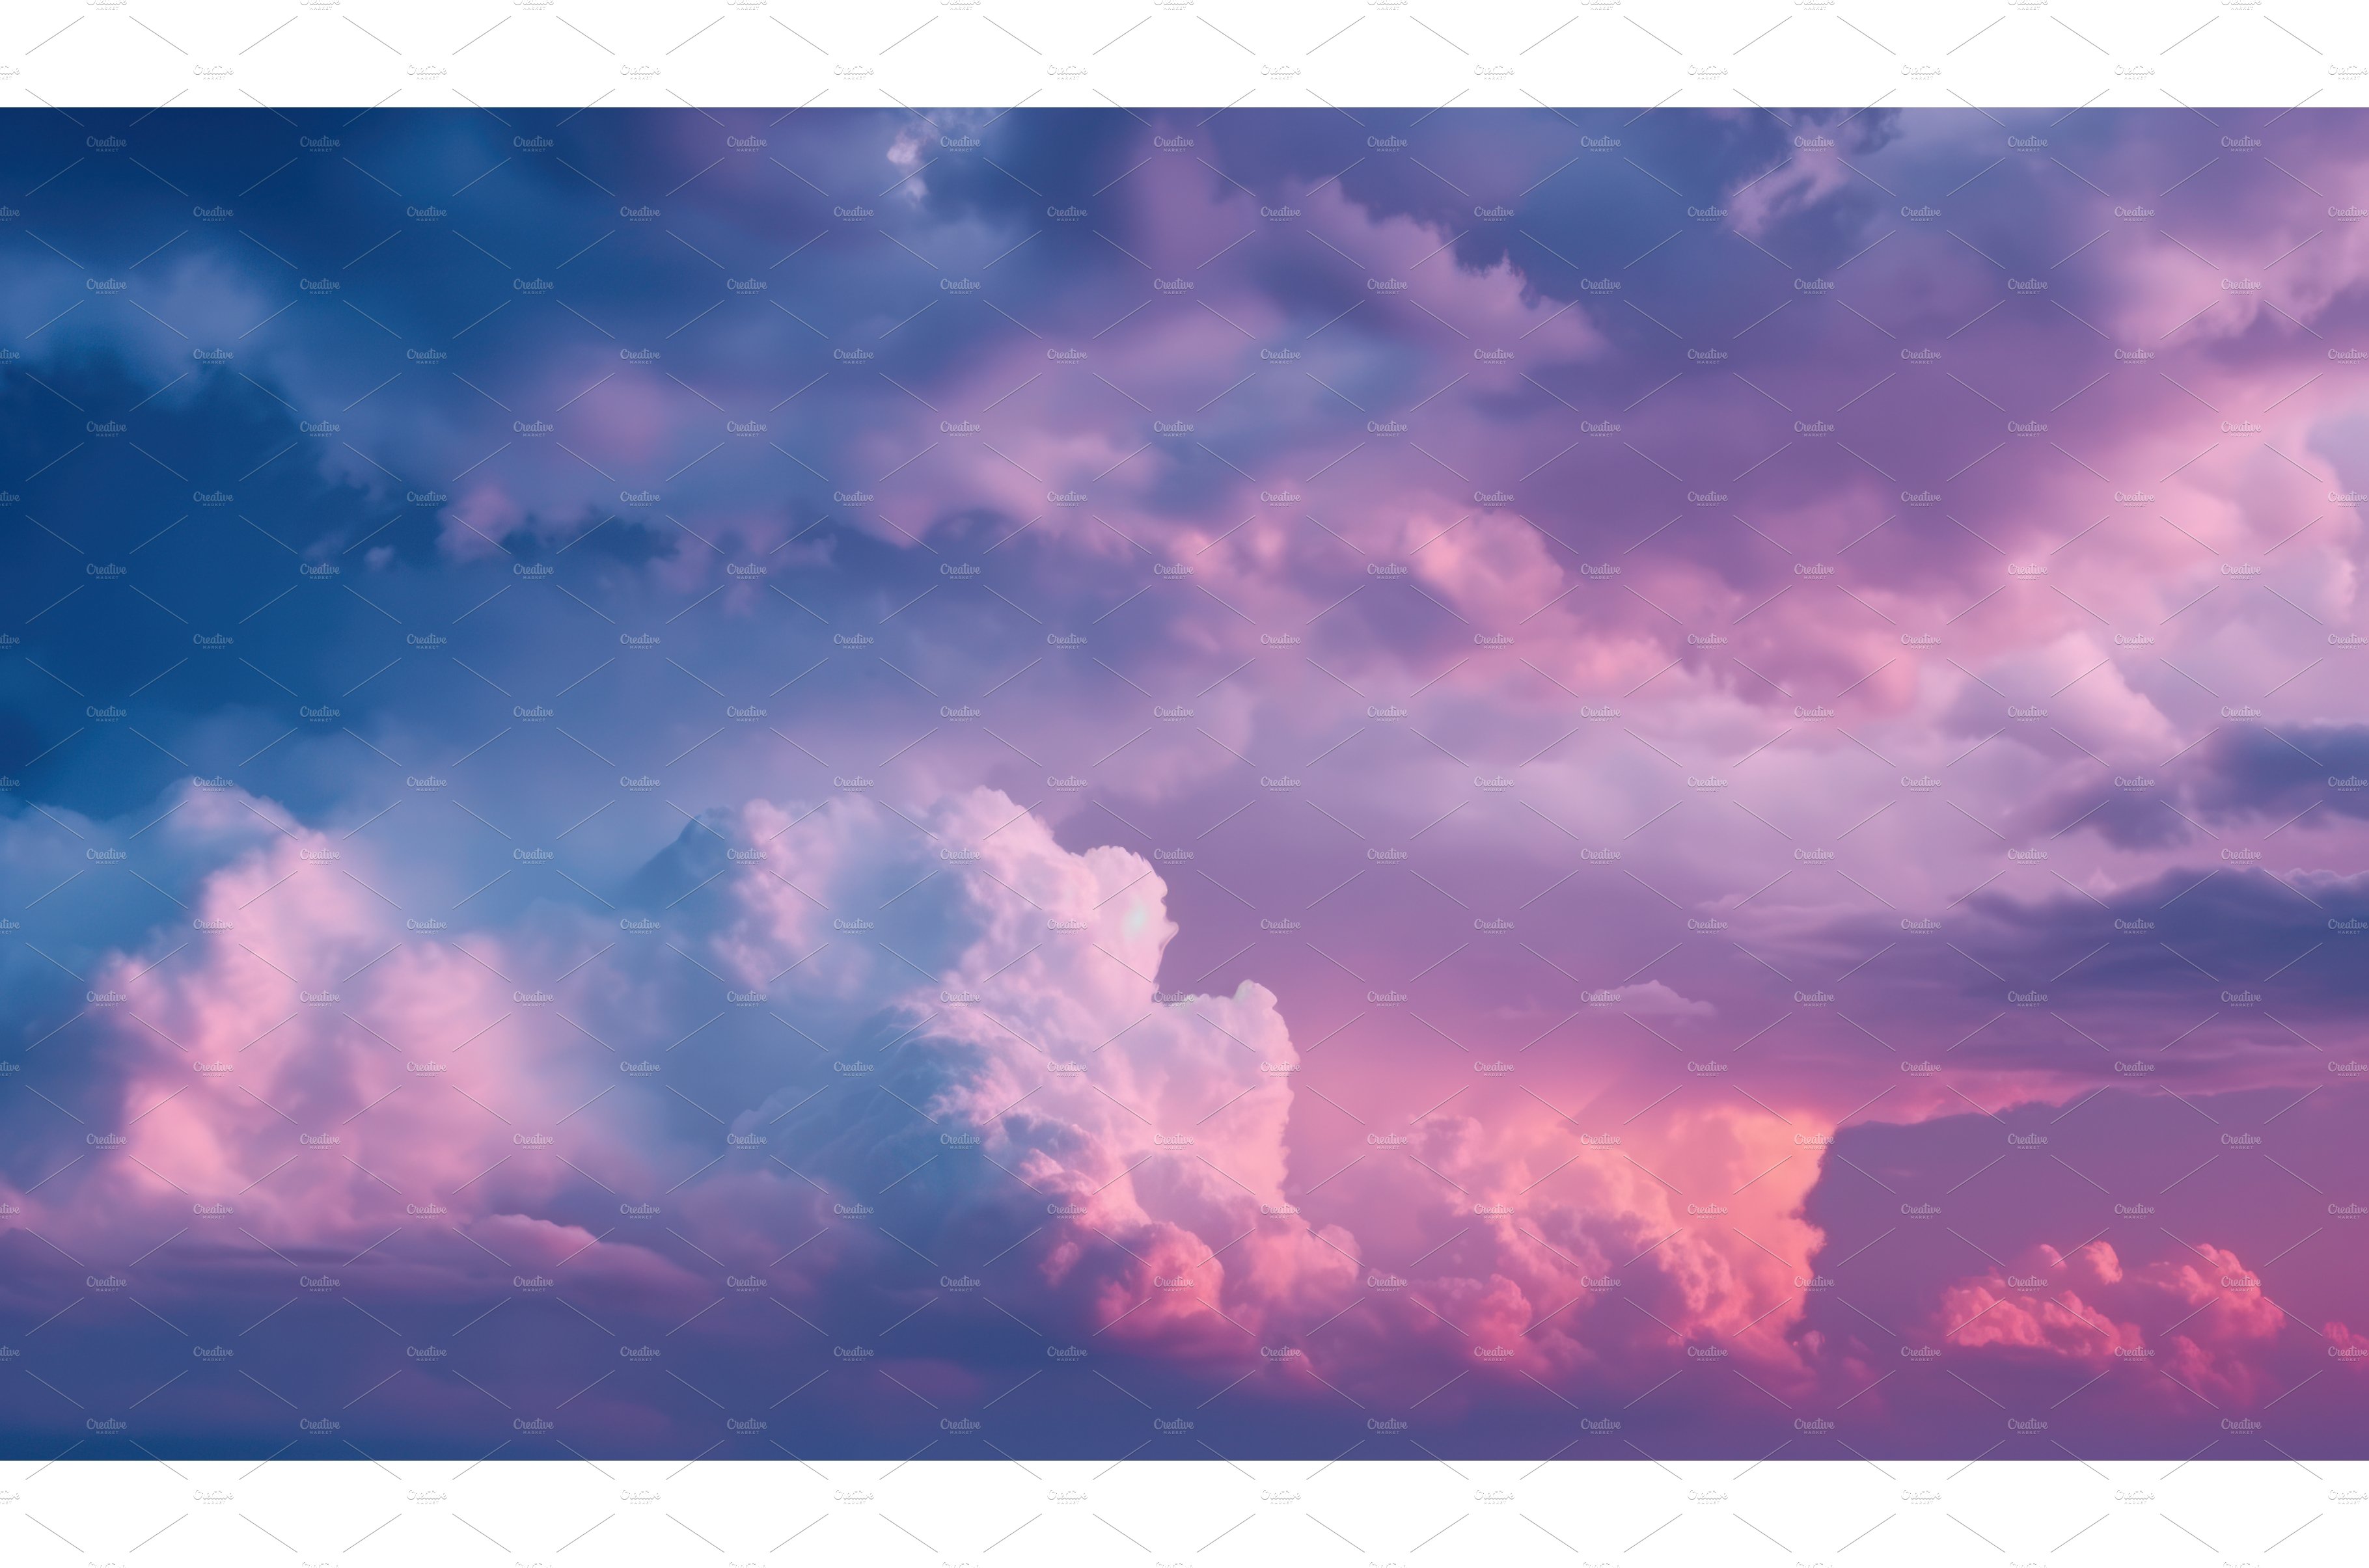 Cloudy Skies Background cover image.